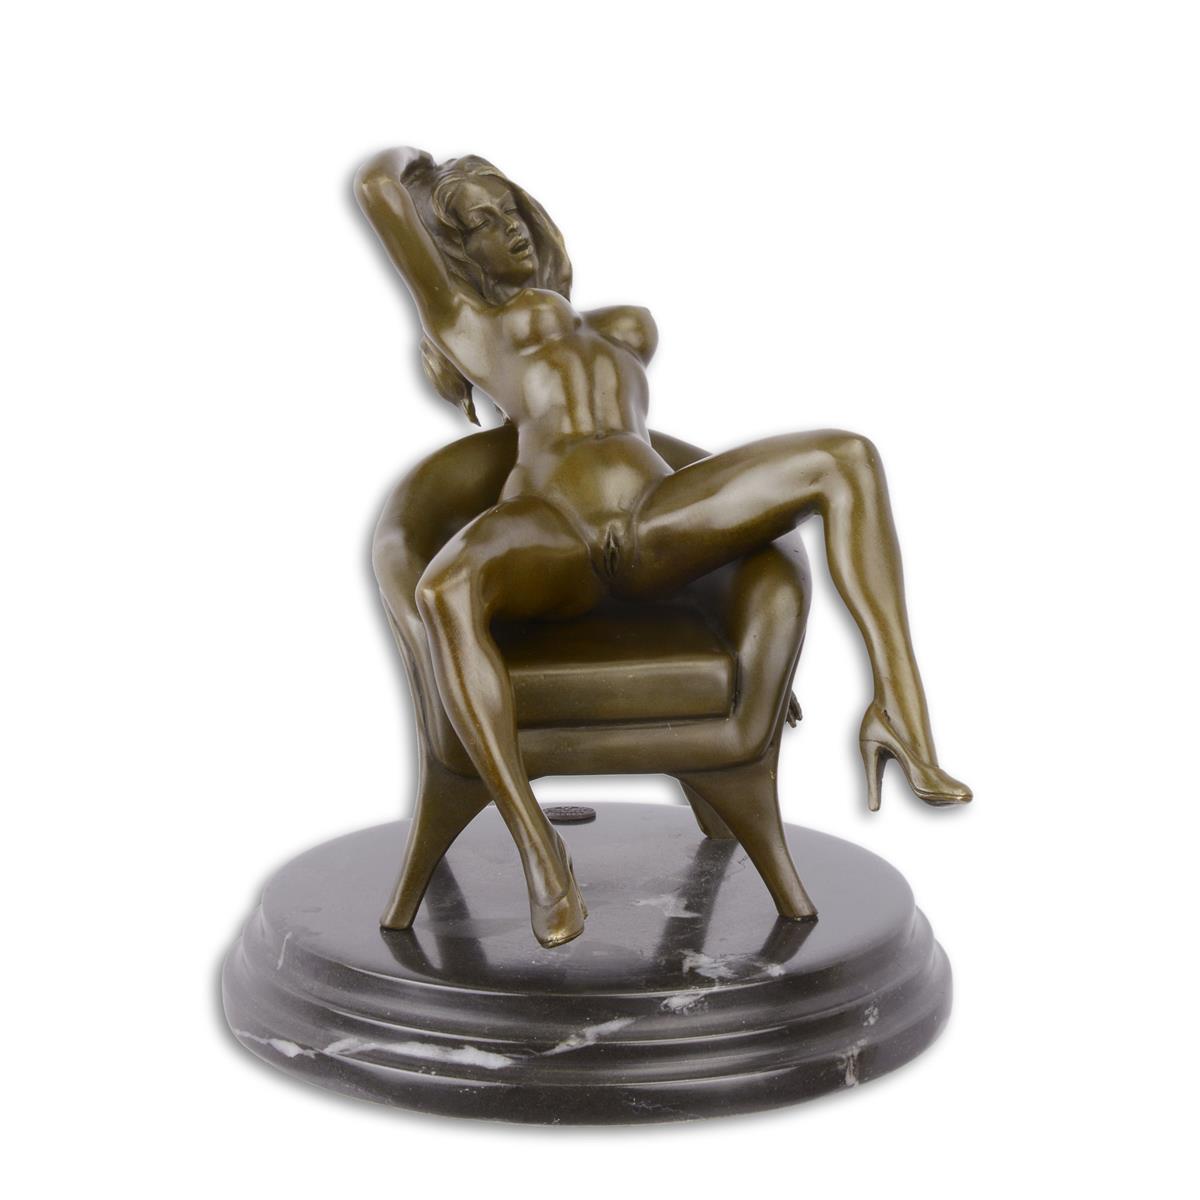 AN EROTIC BRONZE SCULPTURE OF A SEATED FEMALE NUDE